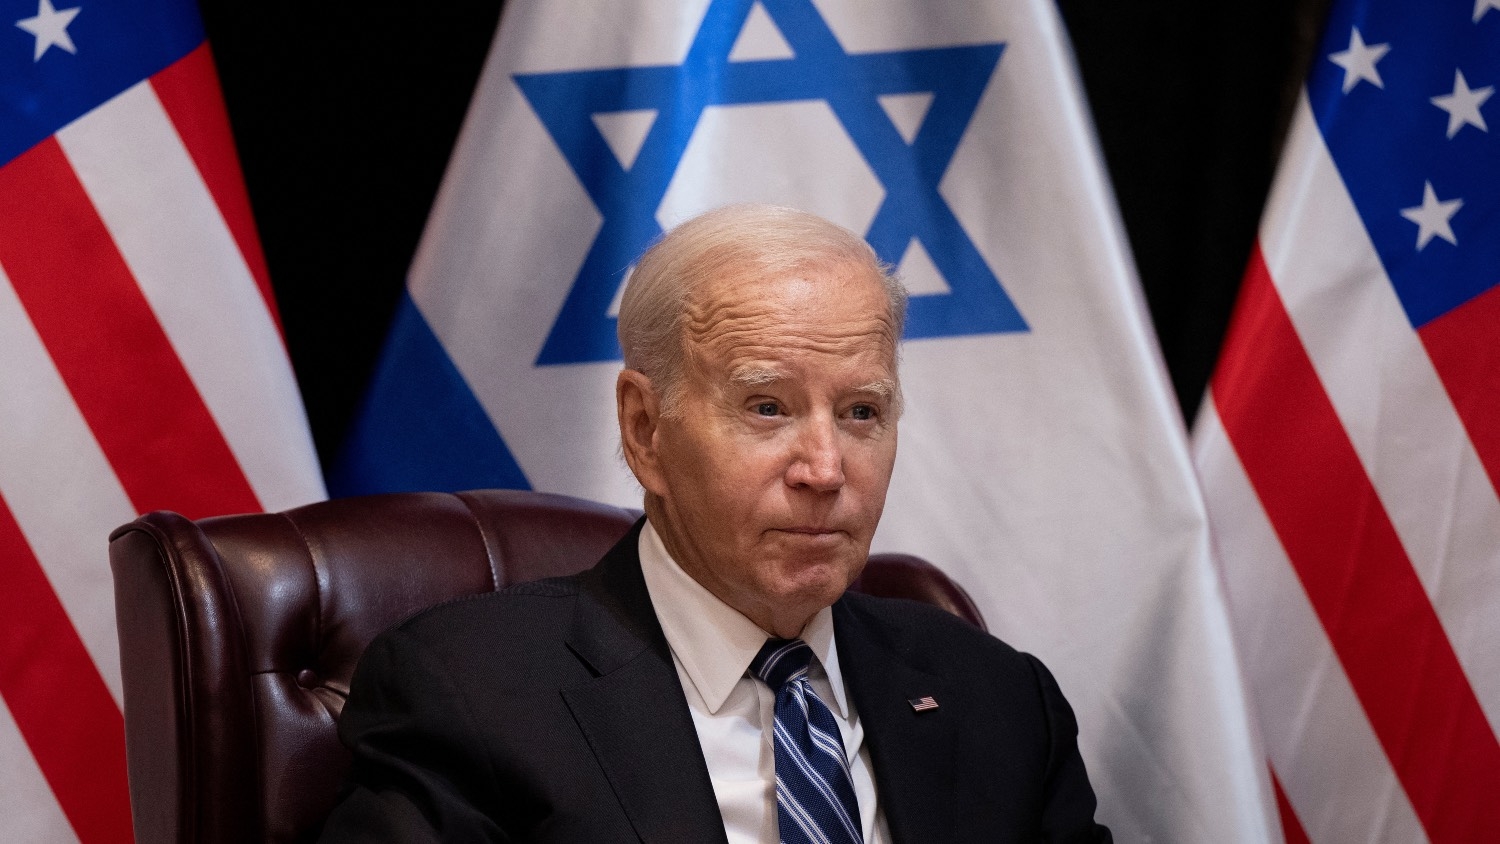 Democrats want proof that Israel isn't using US weapons to violate international law